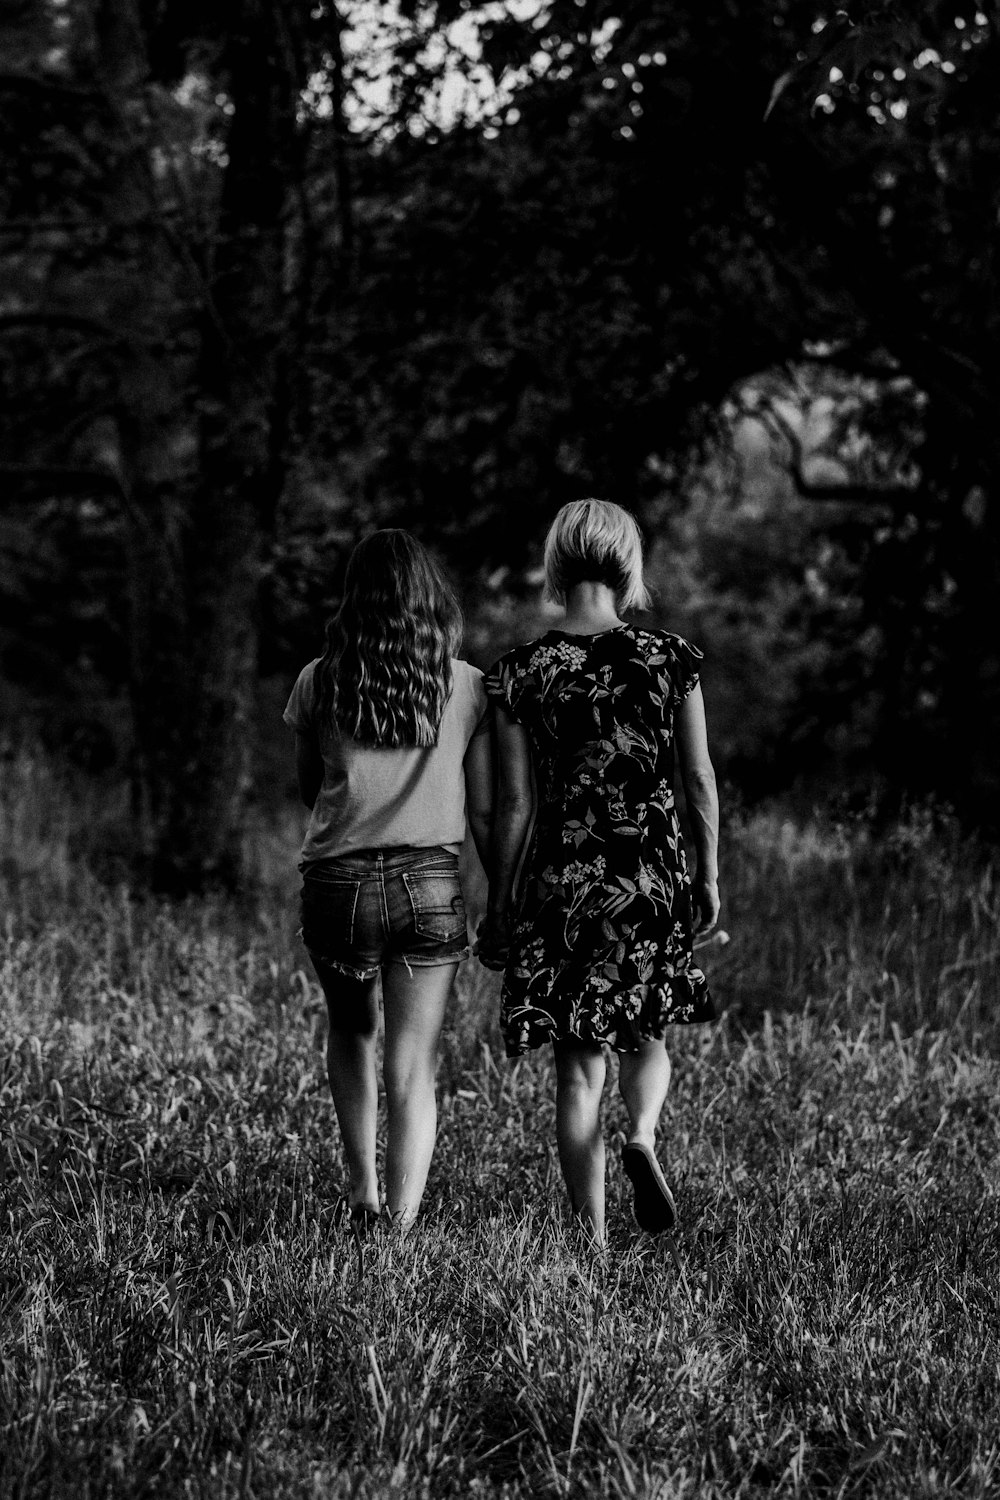 grayscale photo of 2 women standing on grass field